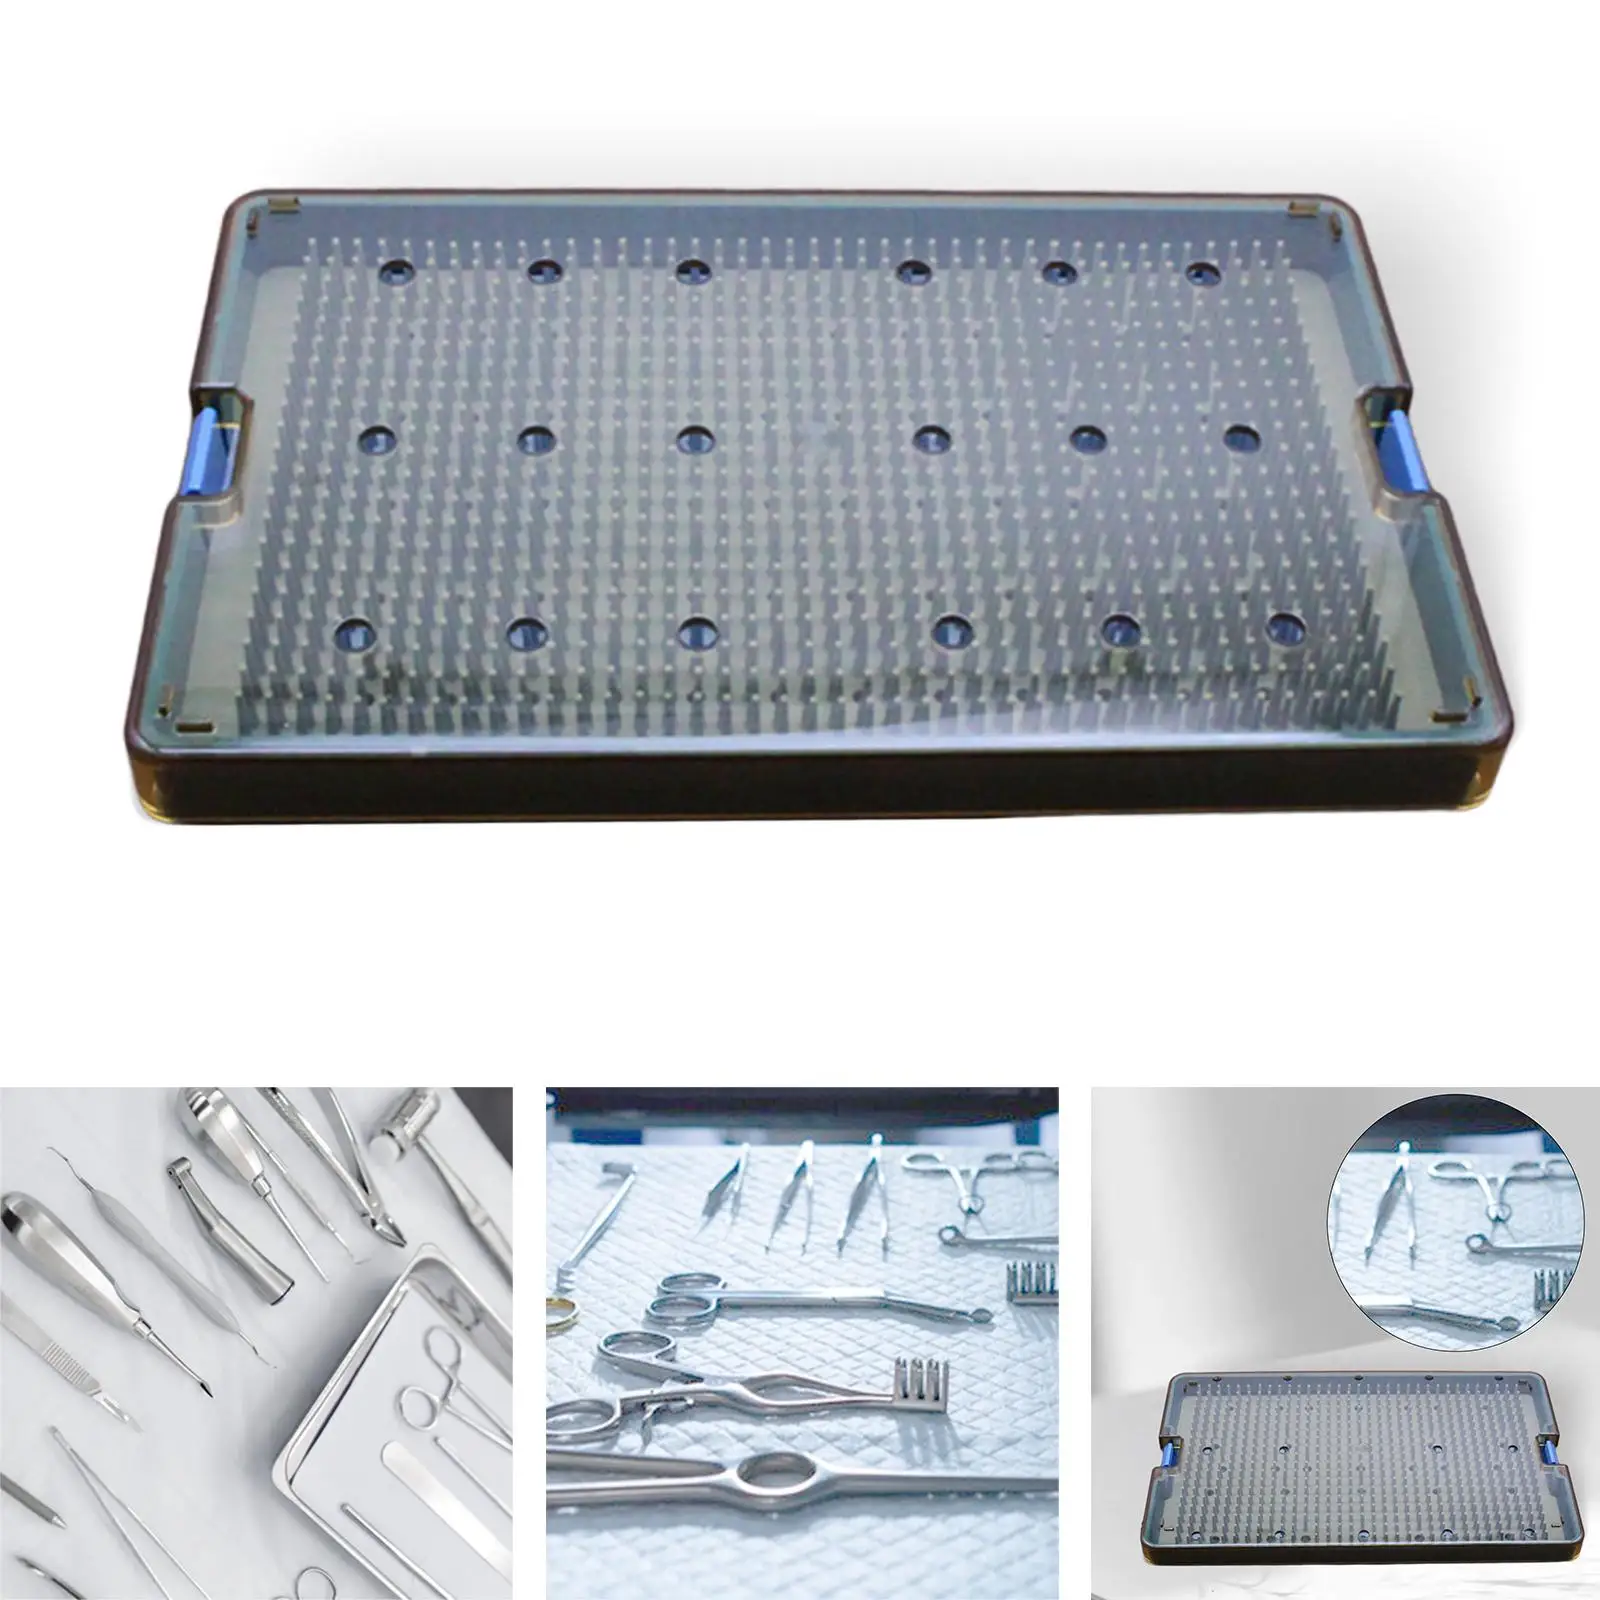 Sterilization Cassette Rack Box Easy to Clean Instruments Disinfection Box Autoclavable Box Sterilization Tray for Ophthalmic